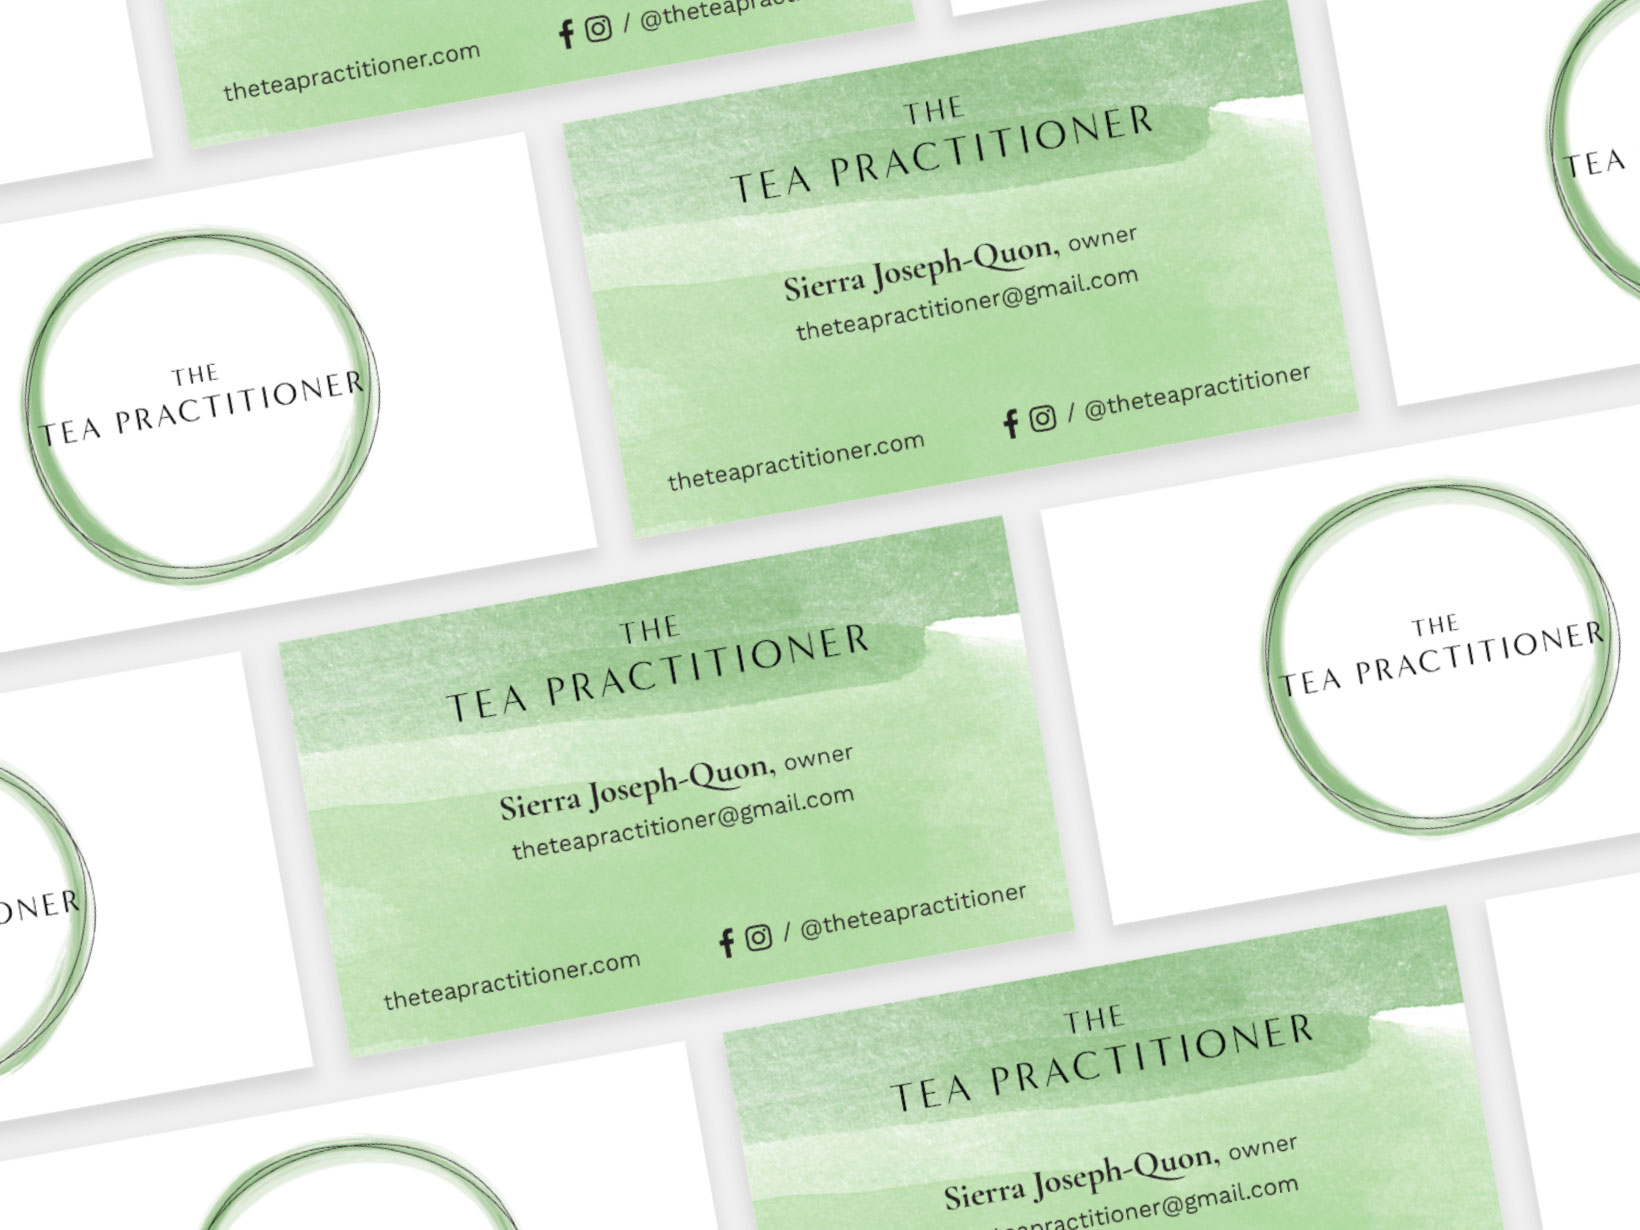 The Tea Practitioner business cards with Sierra Joseph Quon (founder)'s name and contact information. Email is 